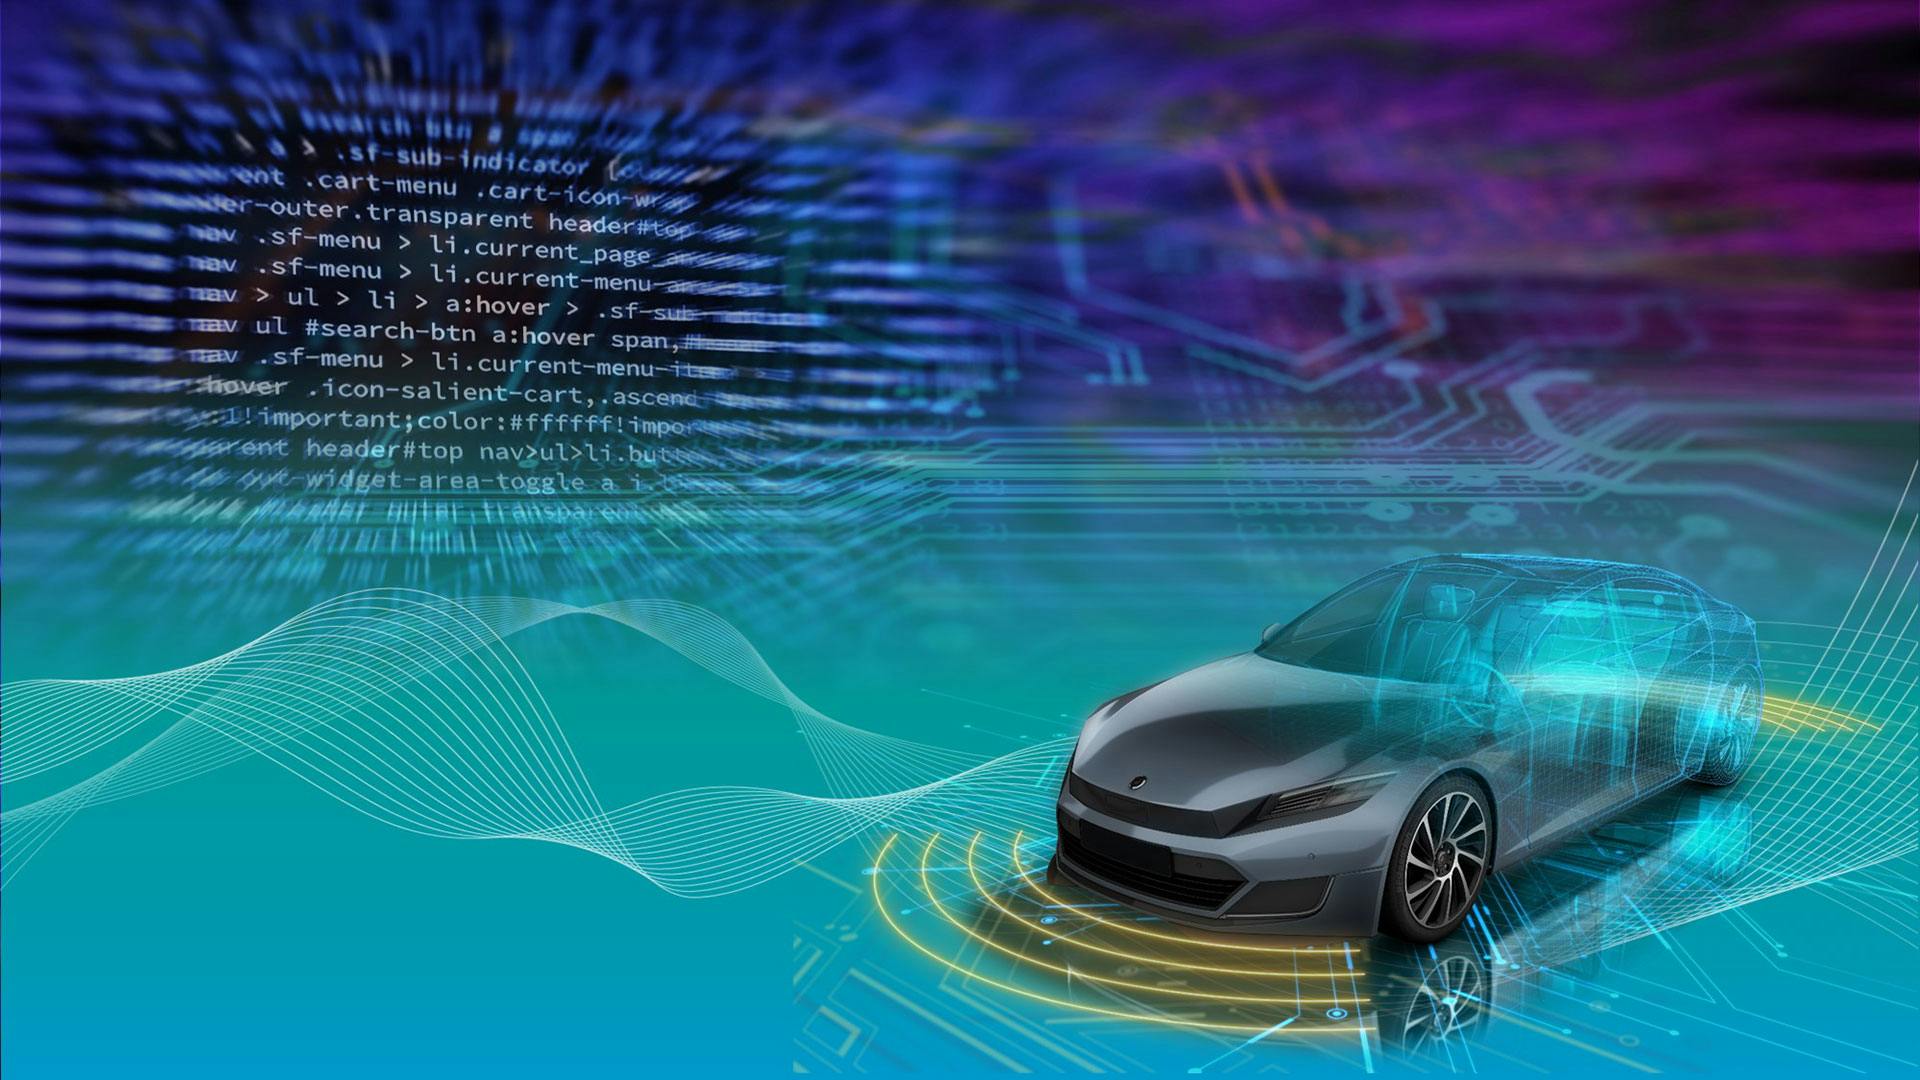 Increase automotive functional safety with ISO 26262 compliance